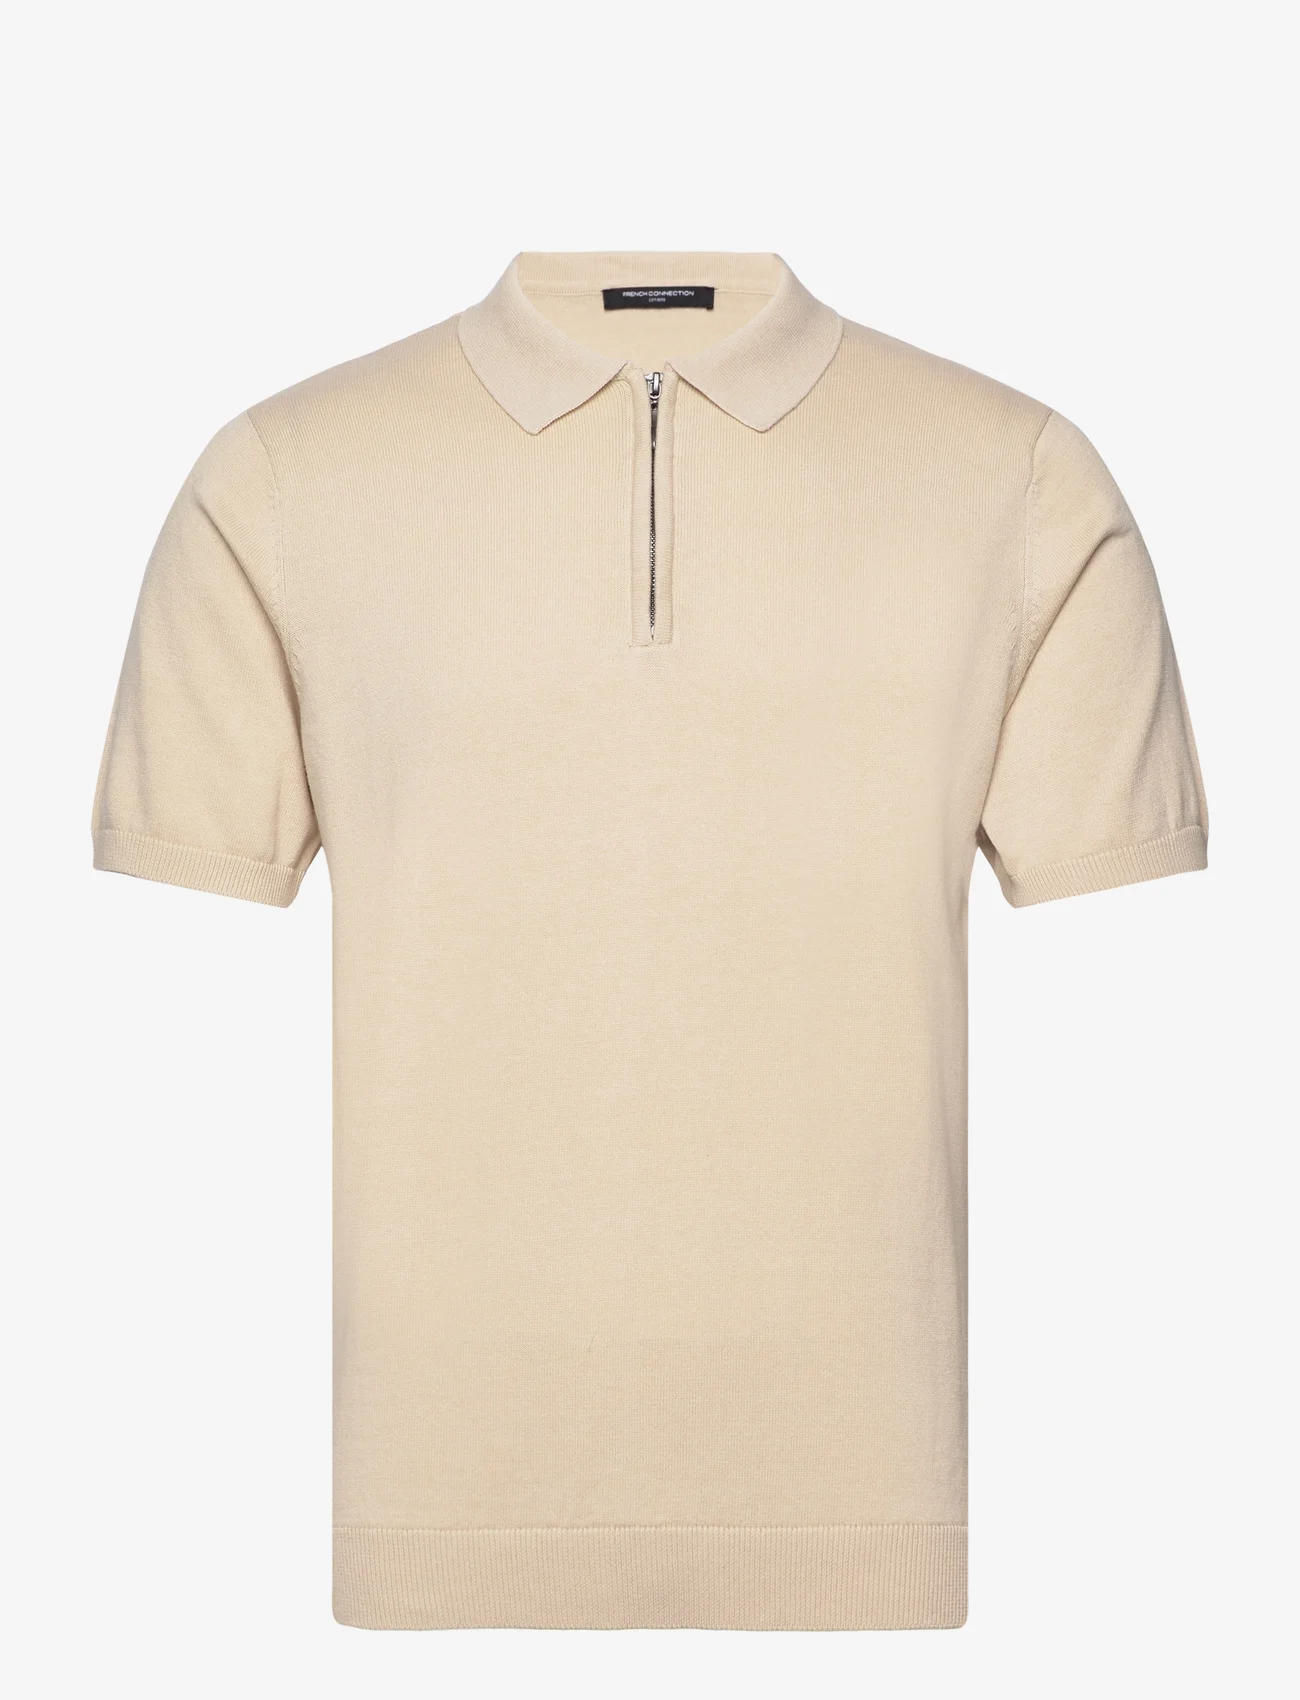 French Connection - ZIP NECK SS POLO - heren - stone - 0